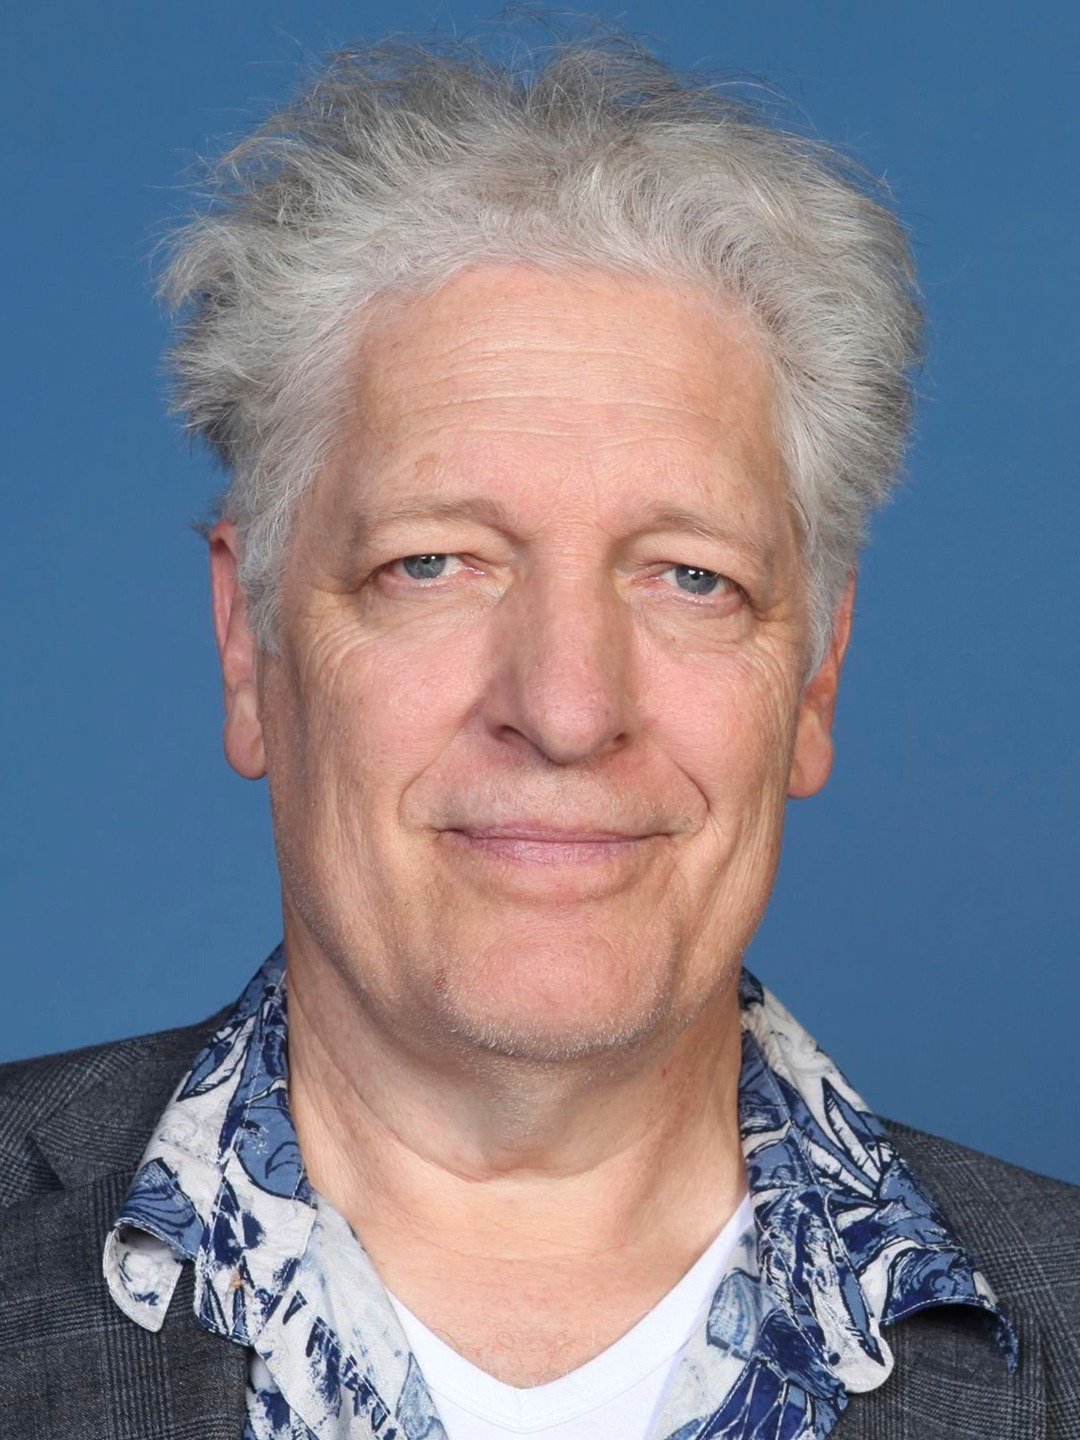 How tall is Clancy Brown?